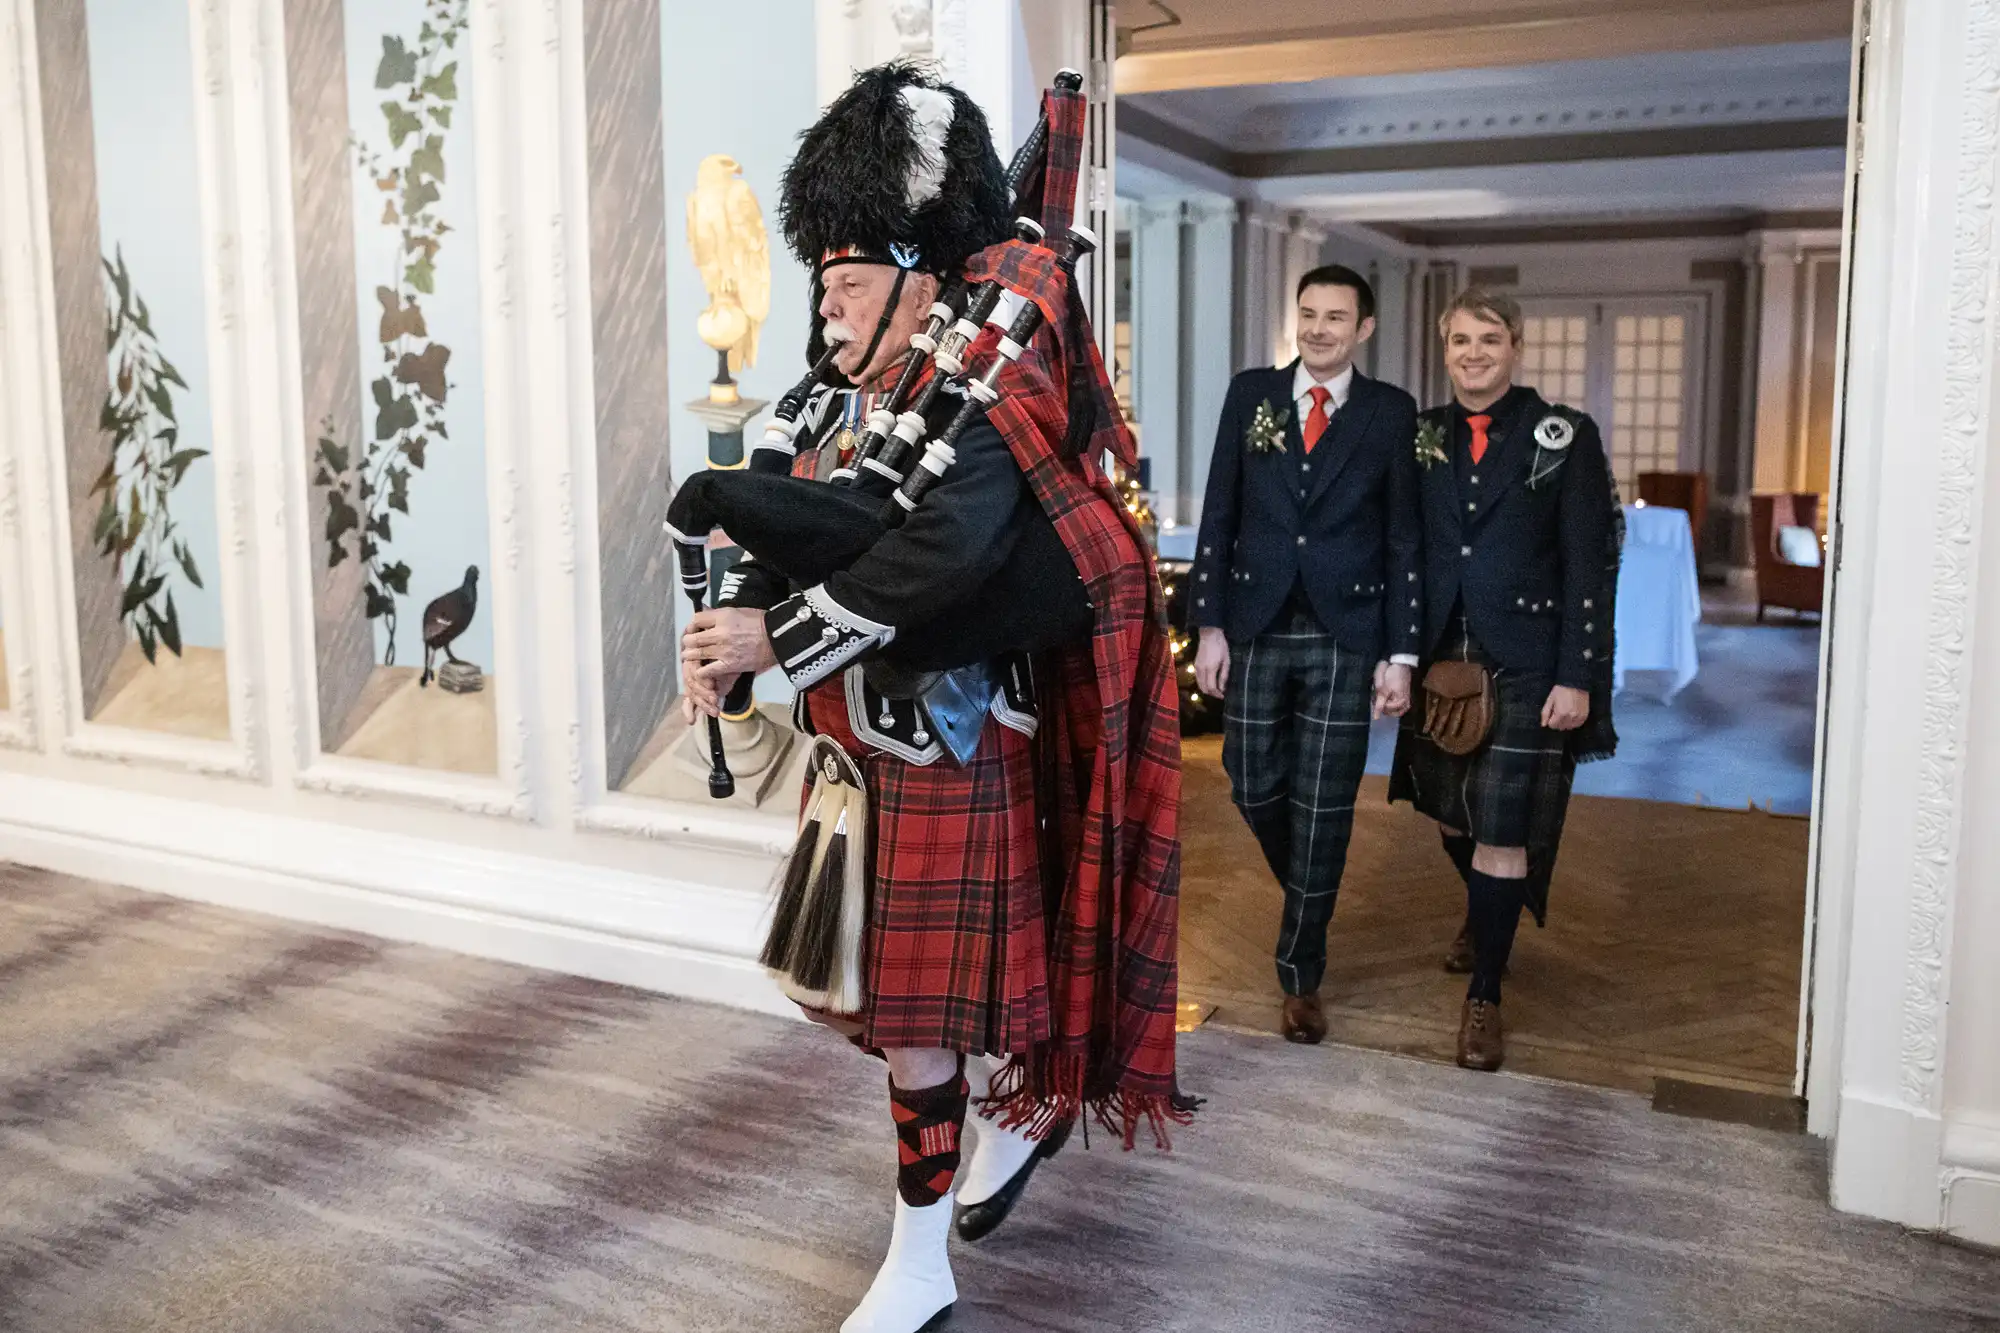 A person dressed in traditional Scottish attire plays bagpipes while walking, followed by two people in similar attire. They are indoors in an ornate room with white walls and wood flooring.